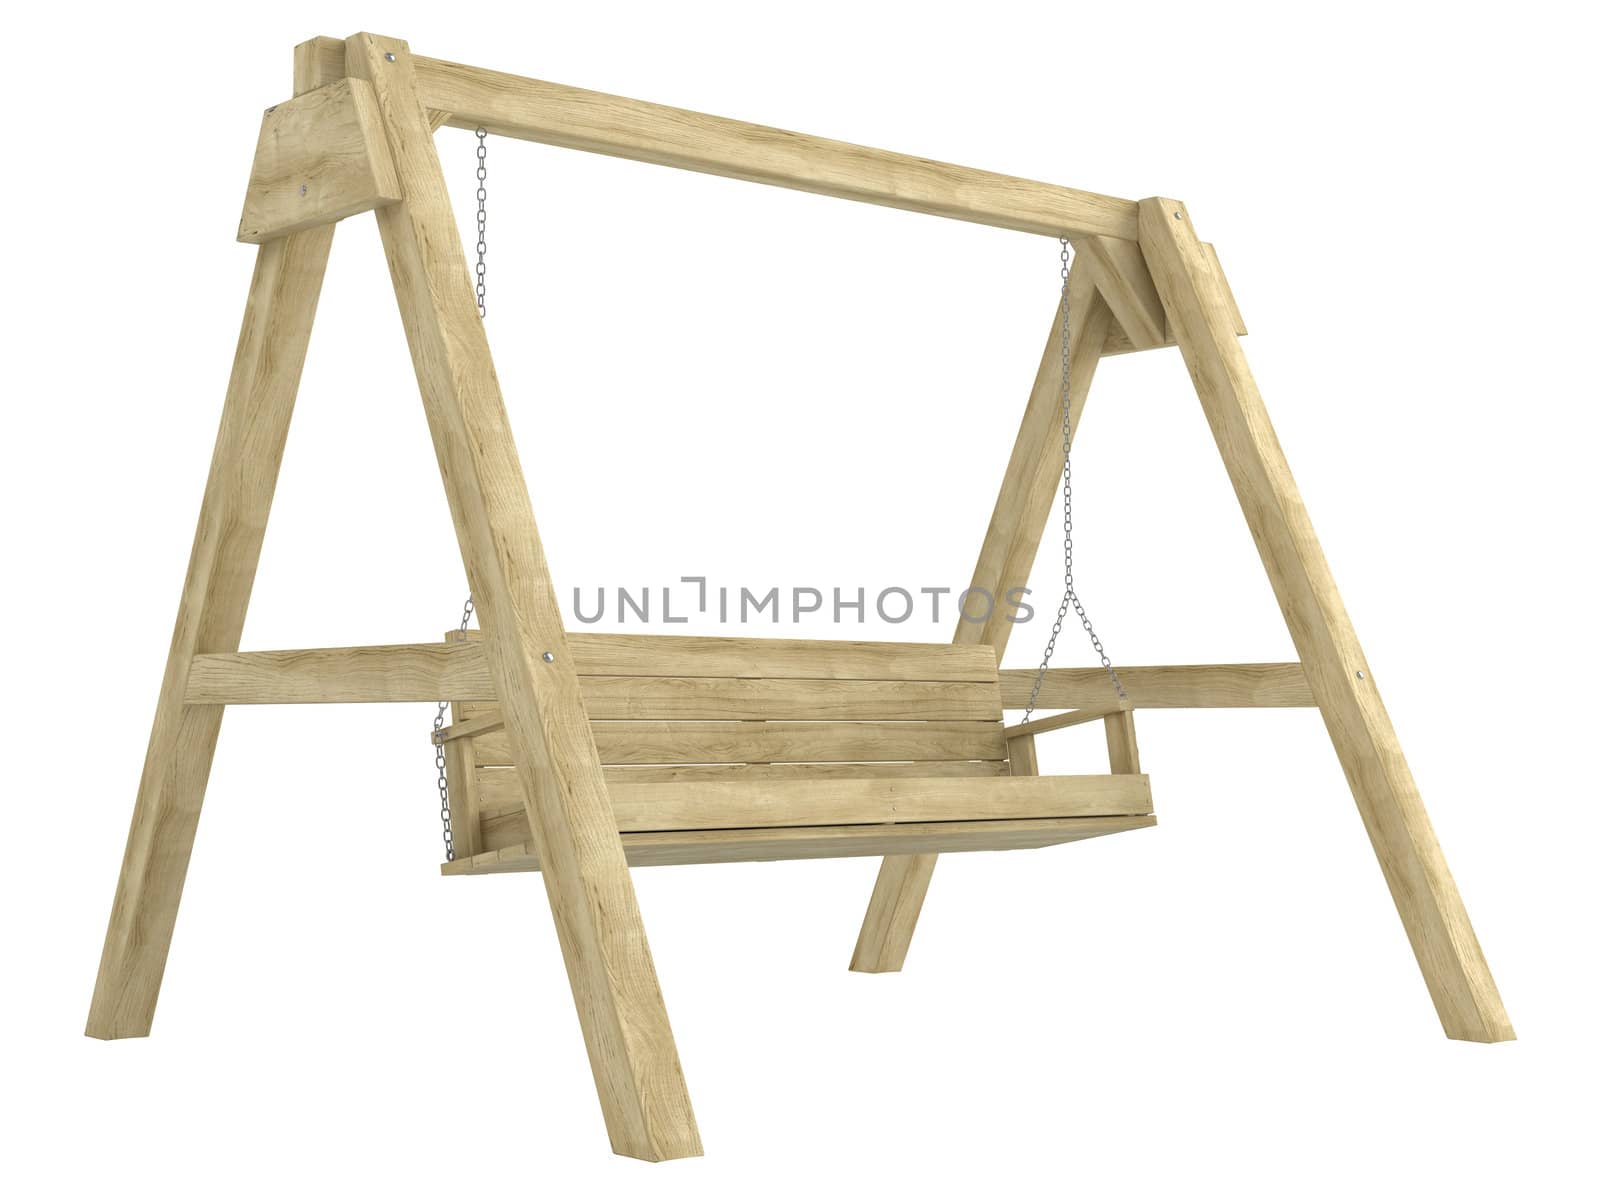 Wooden garden swing bench with a sturdy A-frame construction for relaxing in comfort isolated on white